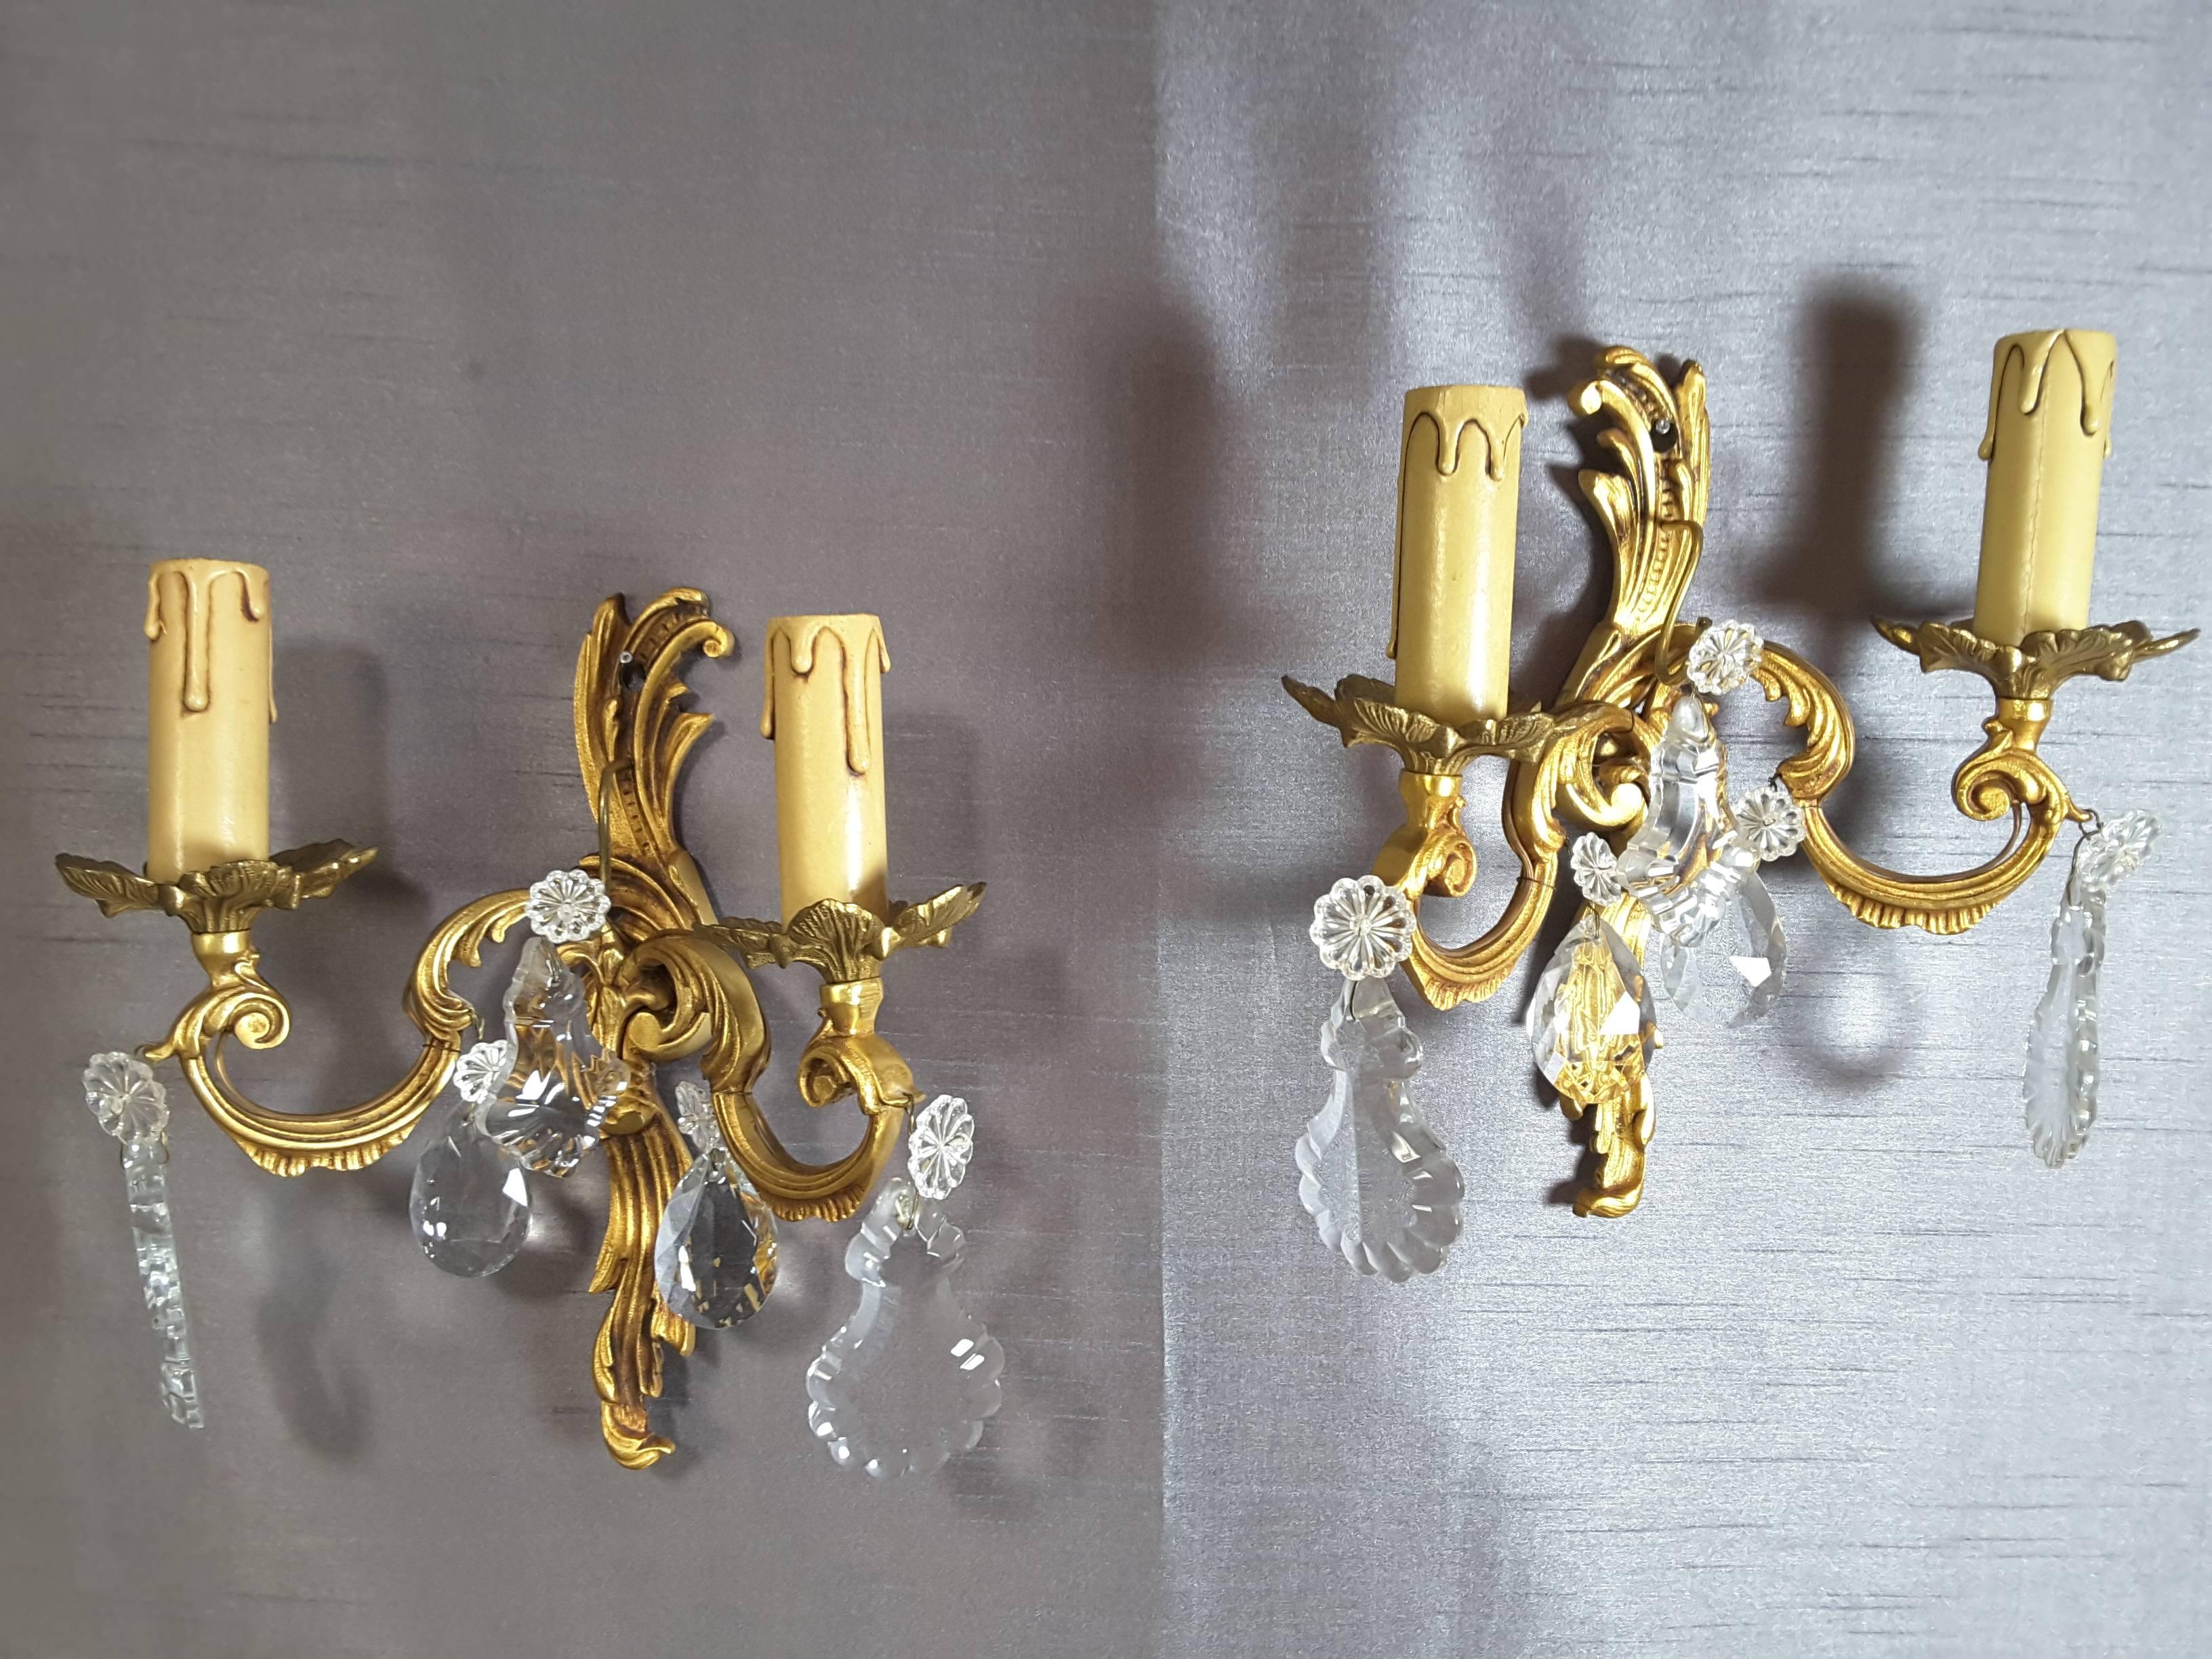 Pair of Brass/Gilt Wall Sconces with Floral Crystals 4